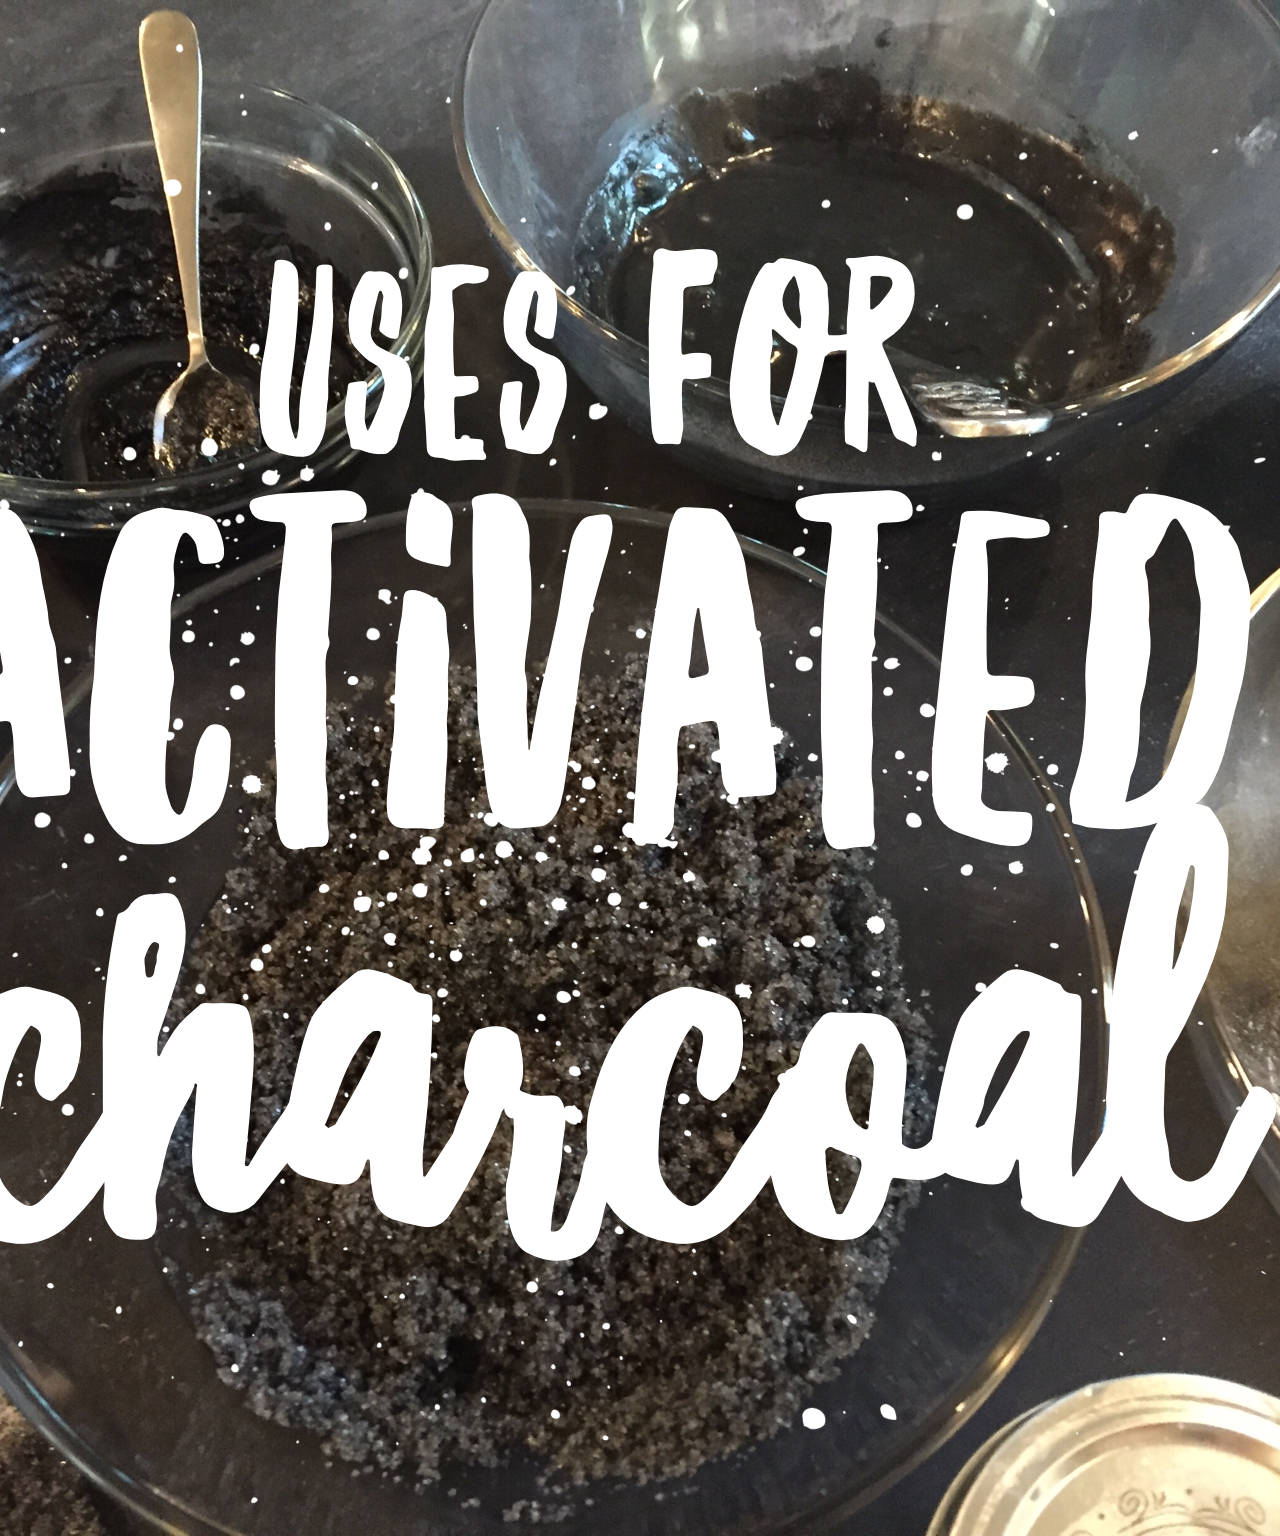 Safety and Uses of Activated Charcoal and its History